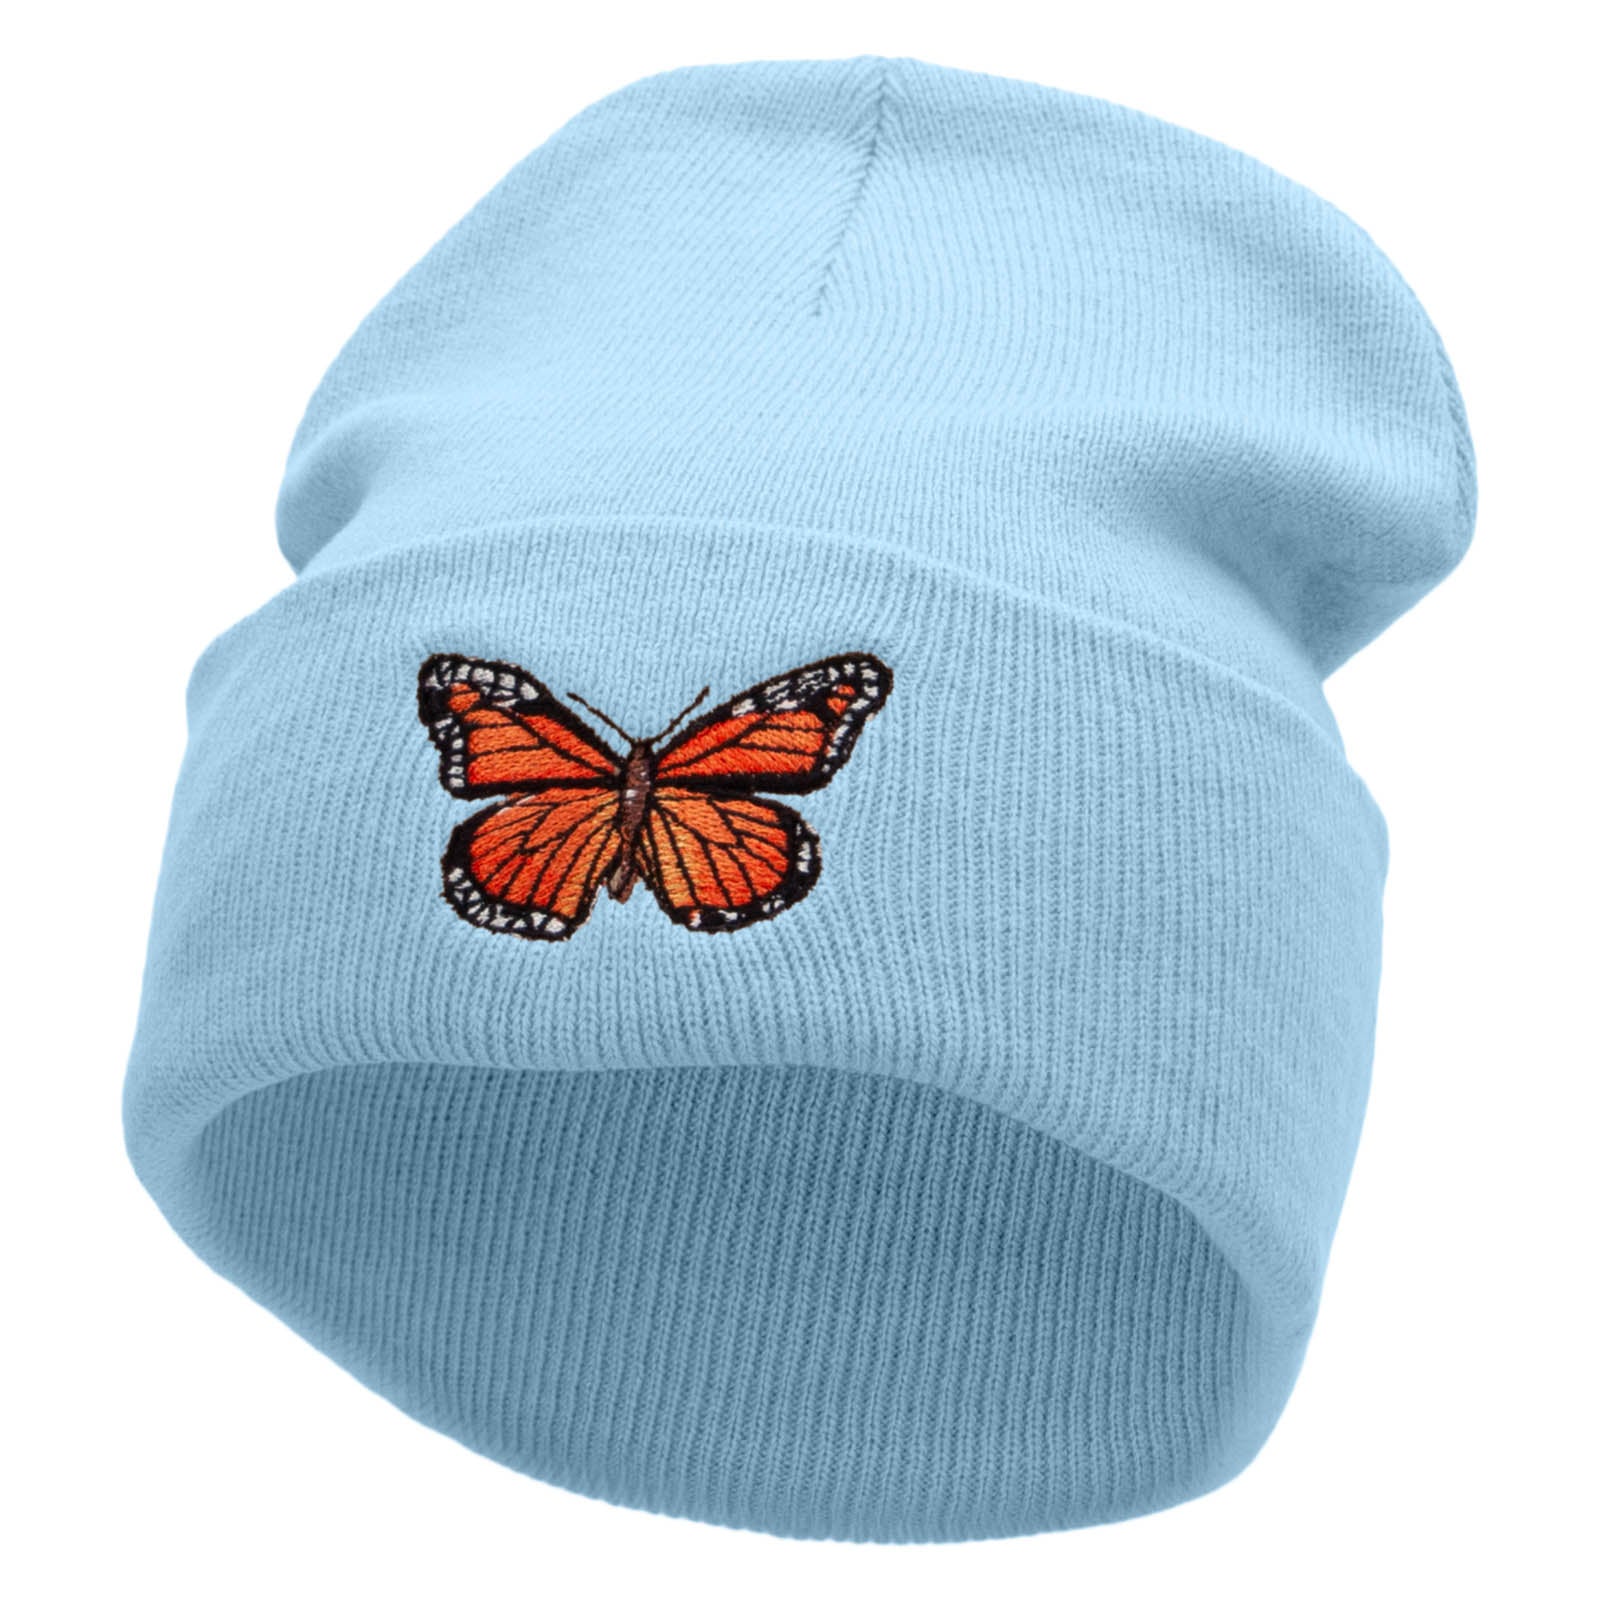 The Monarch Butterfly Embroidered 12 inch Acrylic Cuffed Long Beanie - Lt Blue OSFM